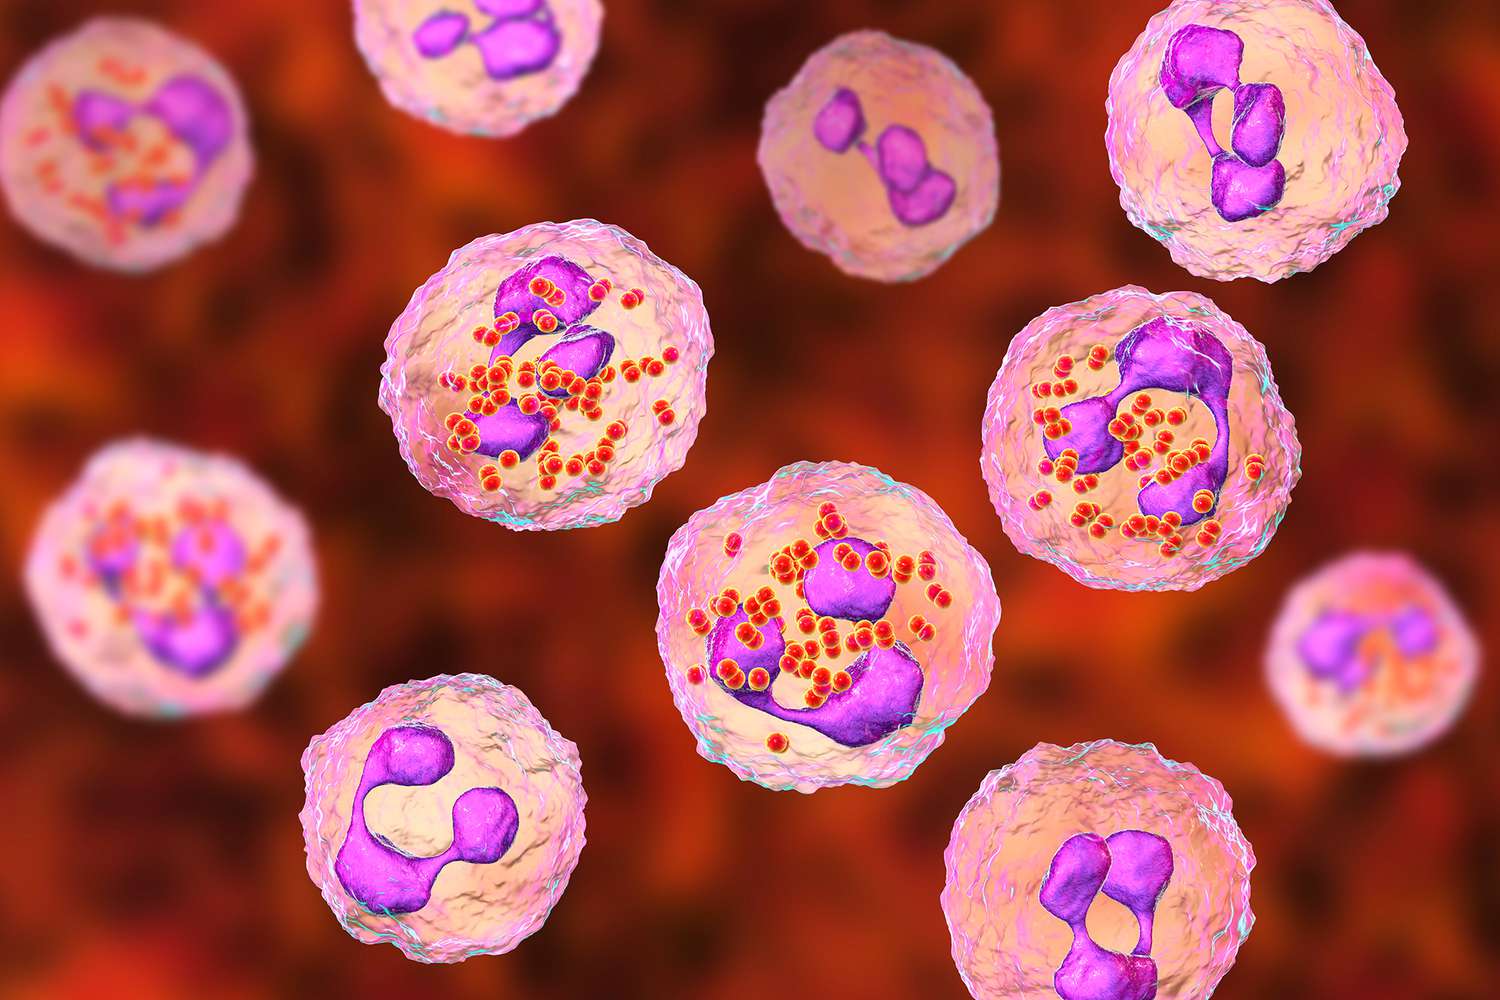 6 Dead amid Meningococcal Disease Outbreak Affecting Gay and Bisexual Men in Florida: CDC